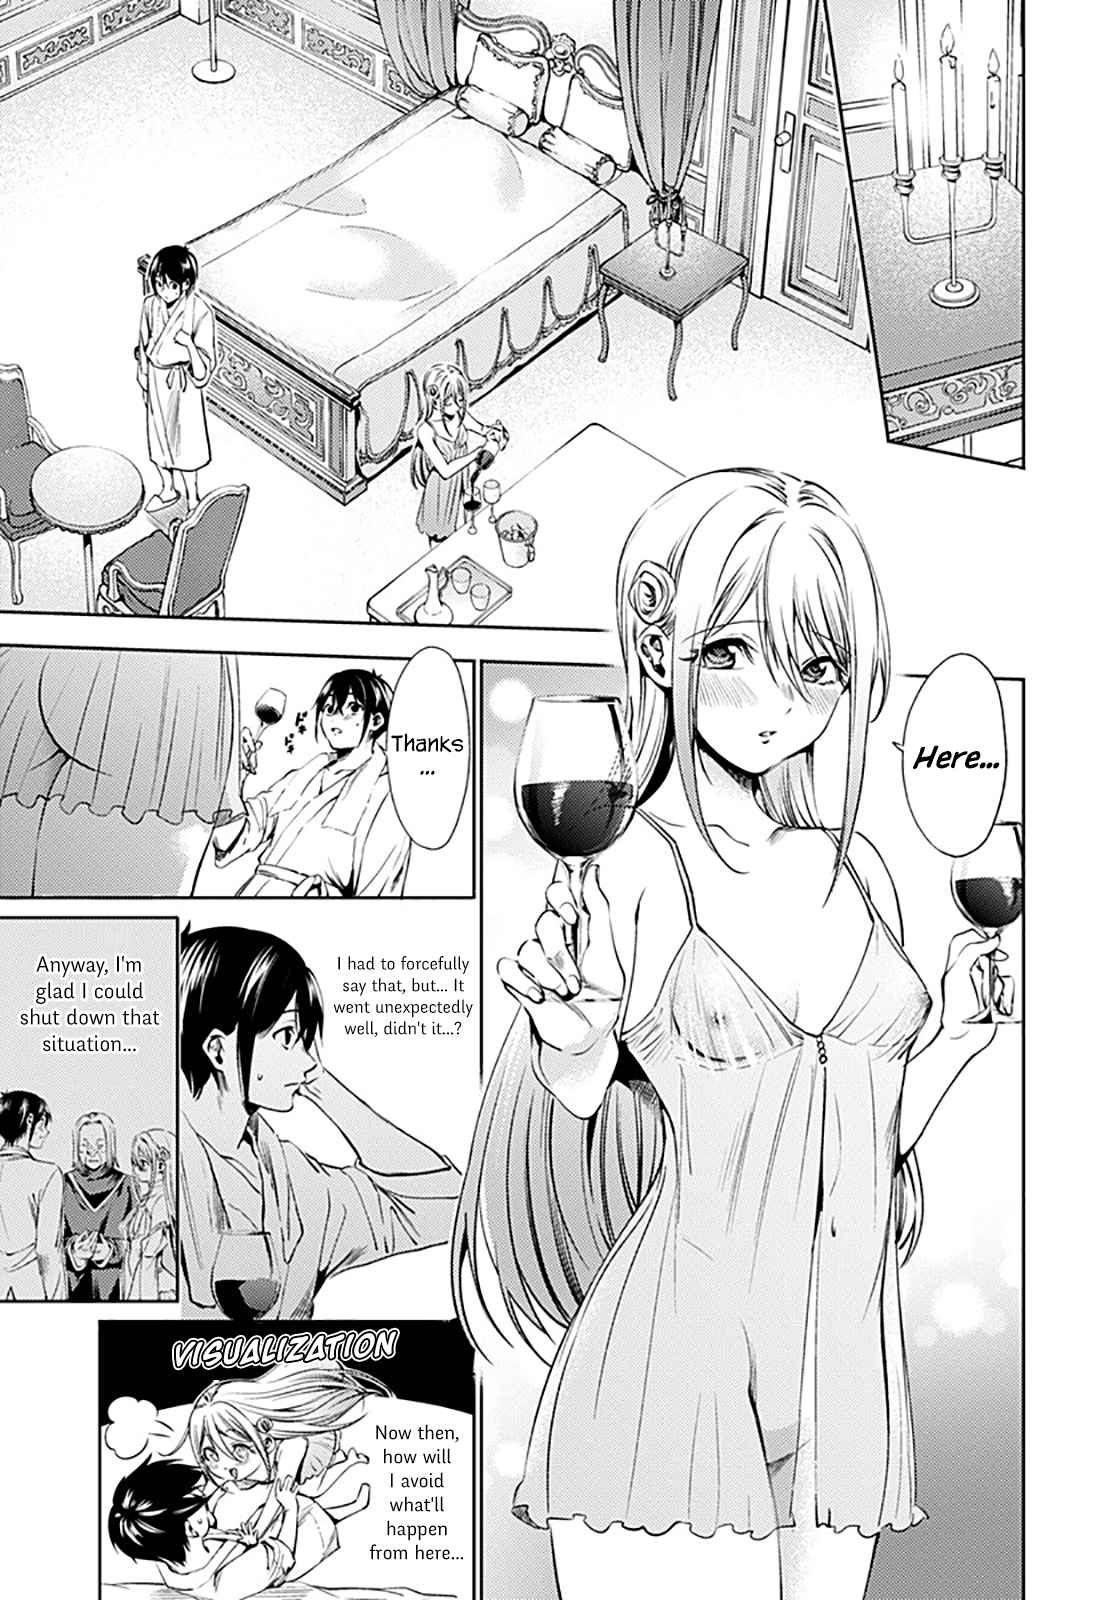 World's End Harem Ch. 65 The Grand Duchess of Rosania